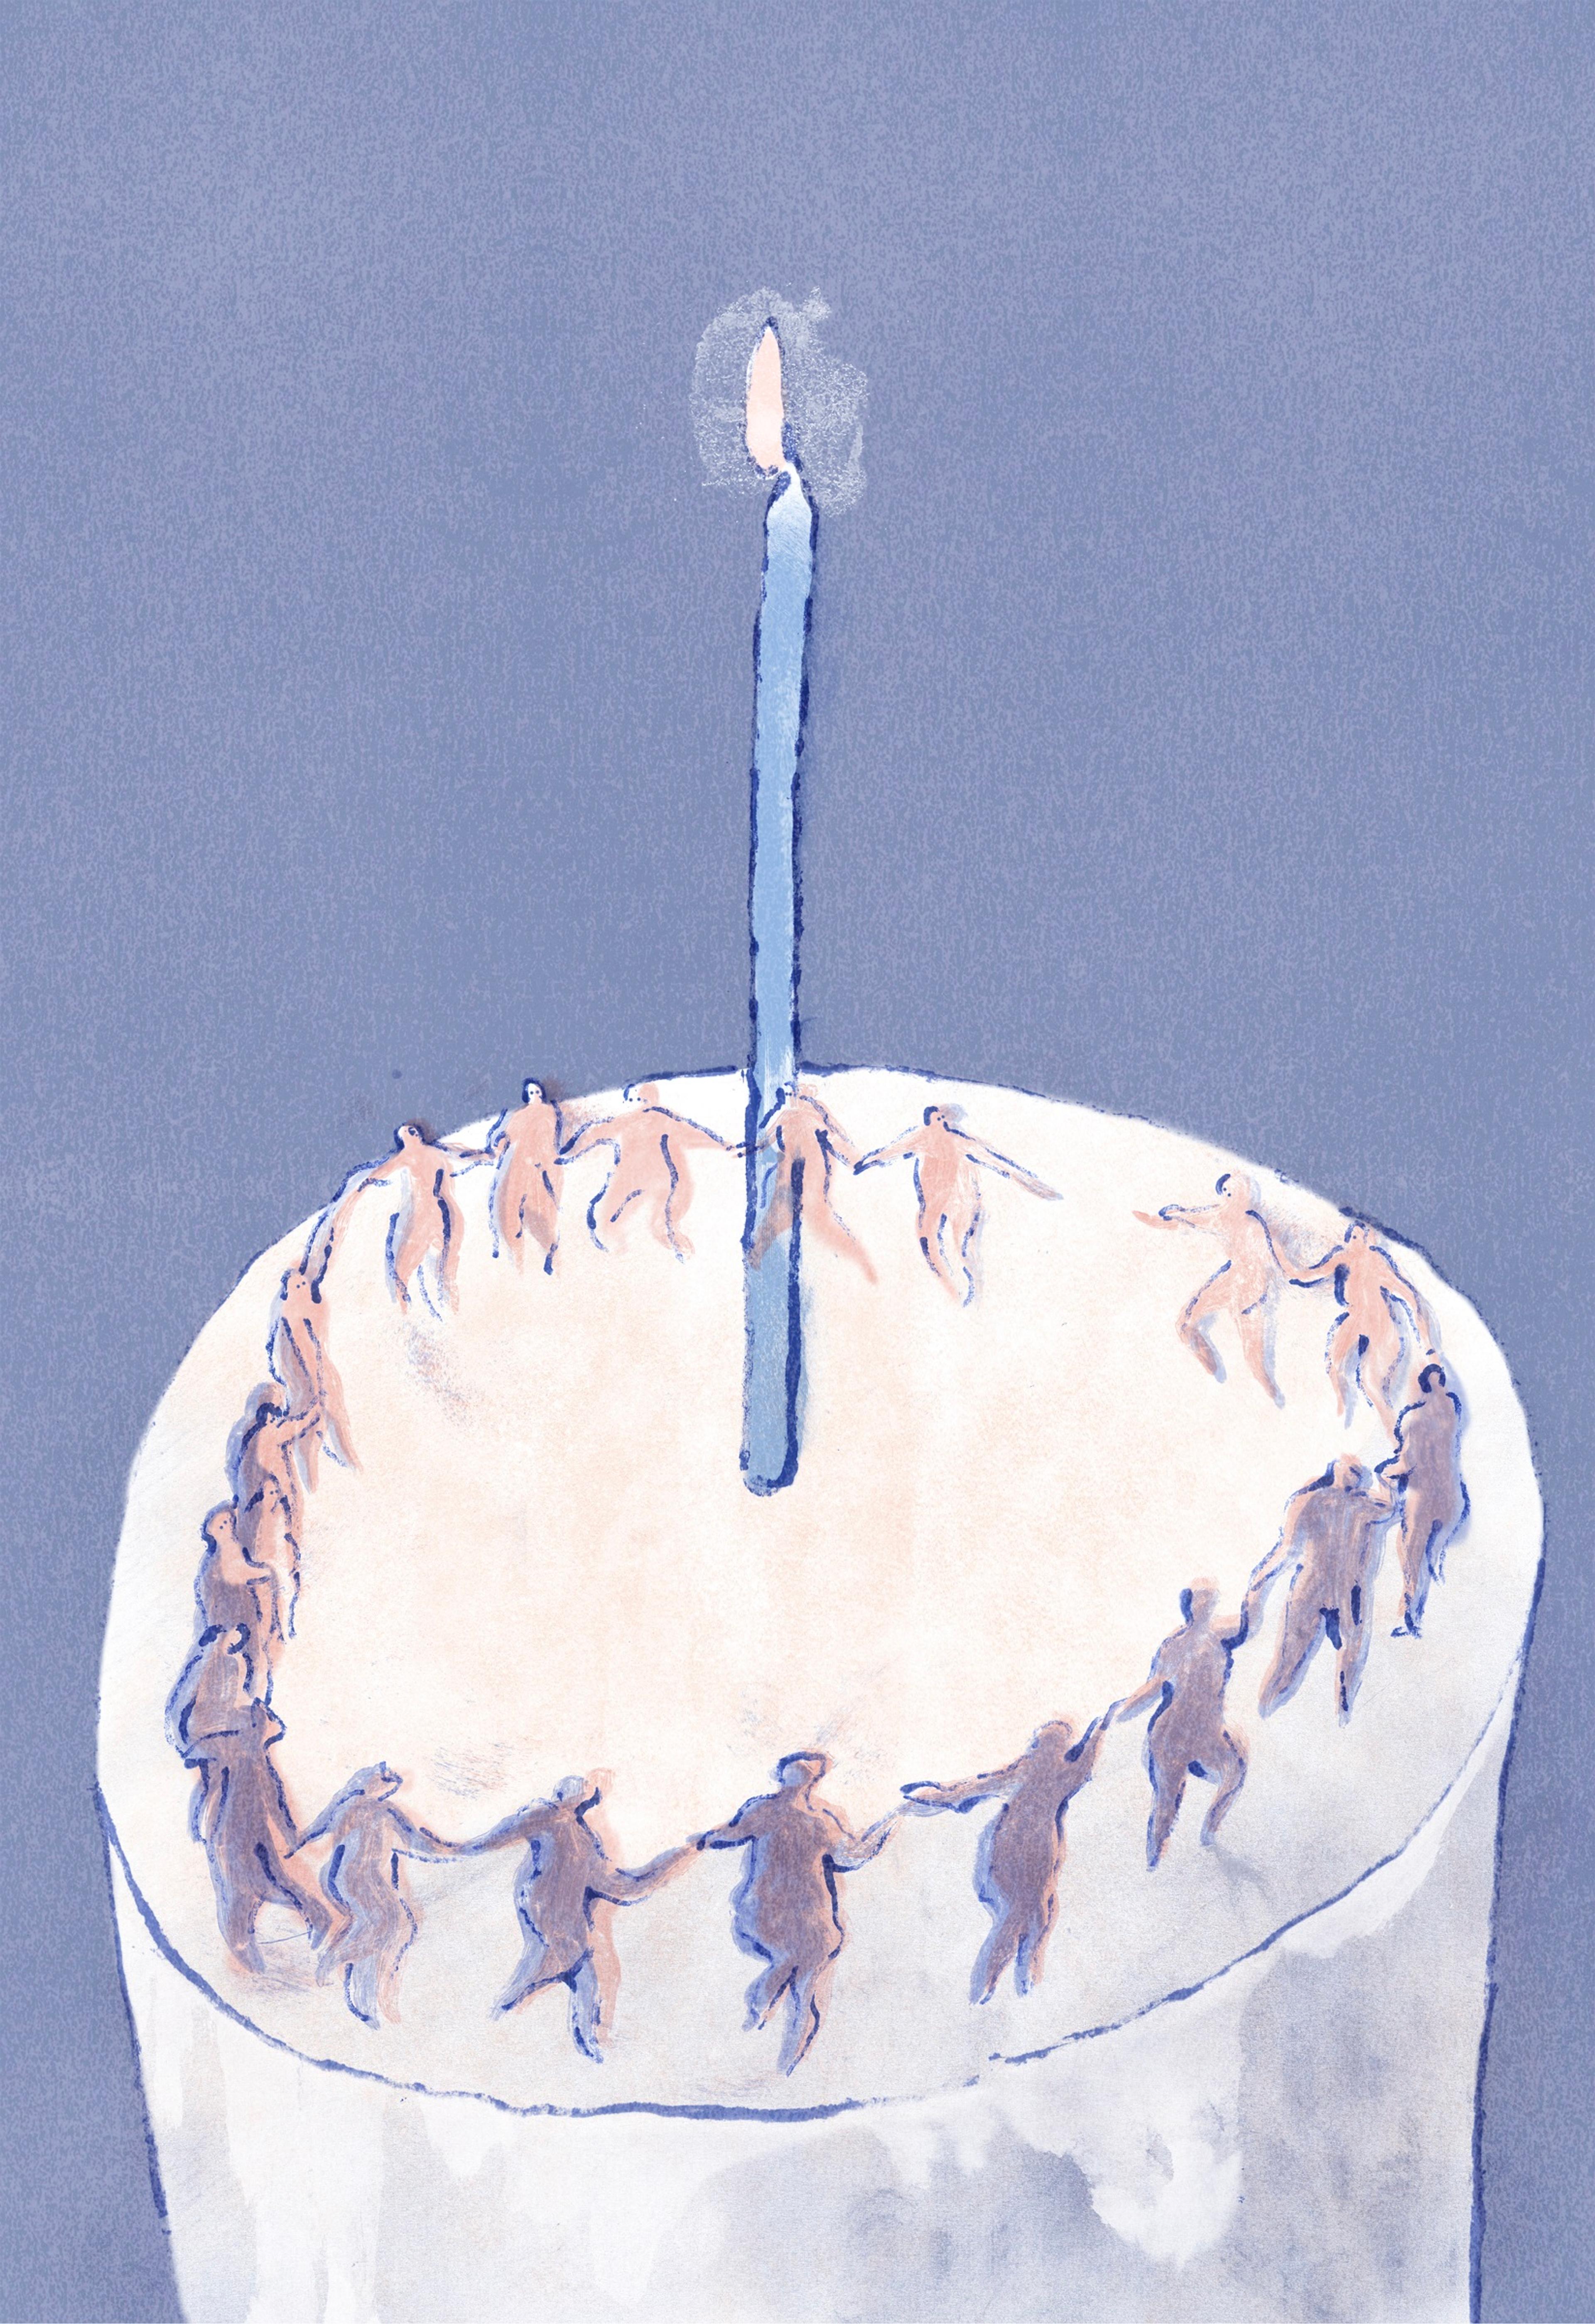 Illustration of people dancing around a candle on top of a birthday cake